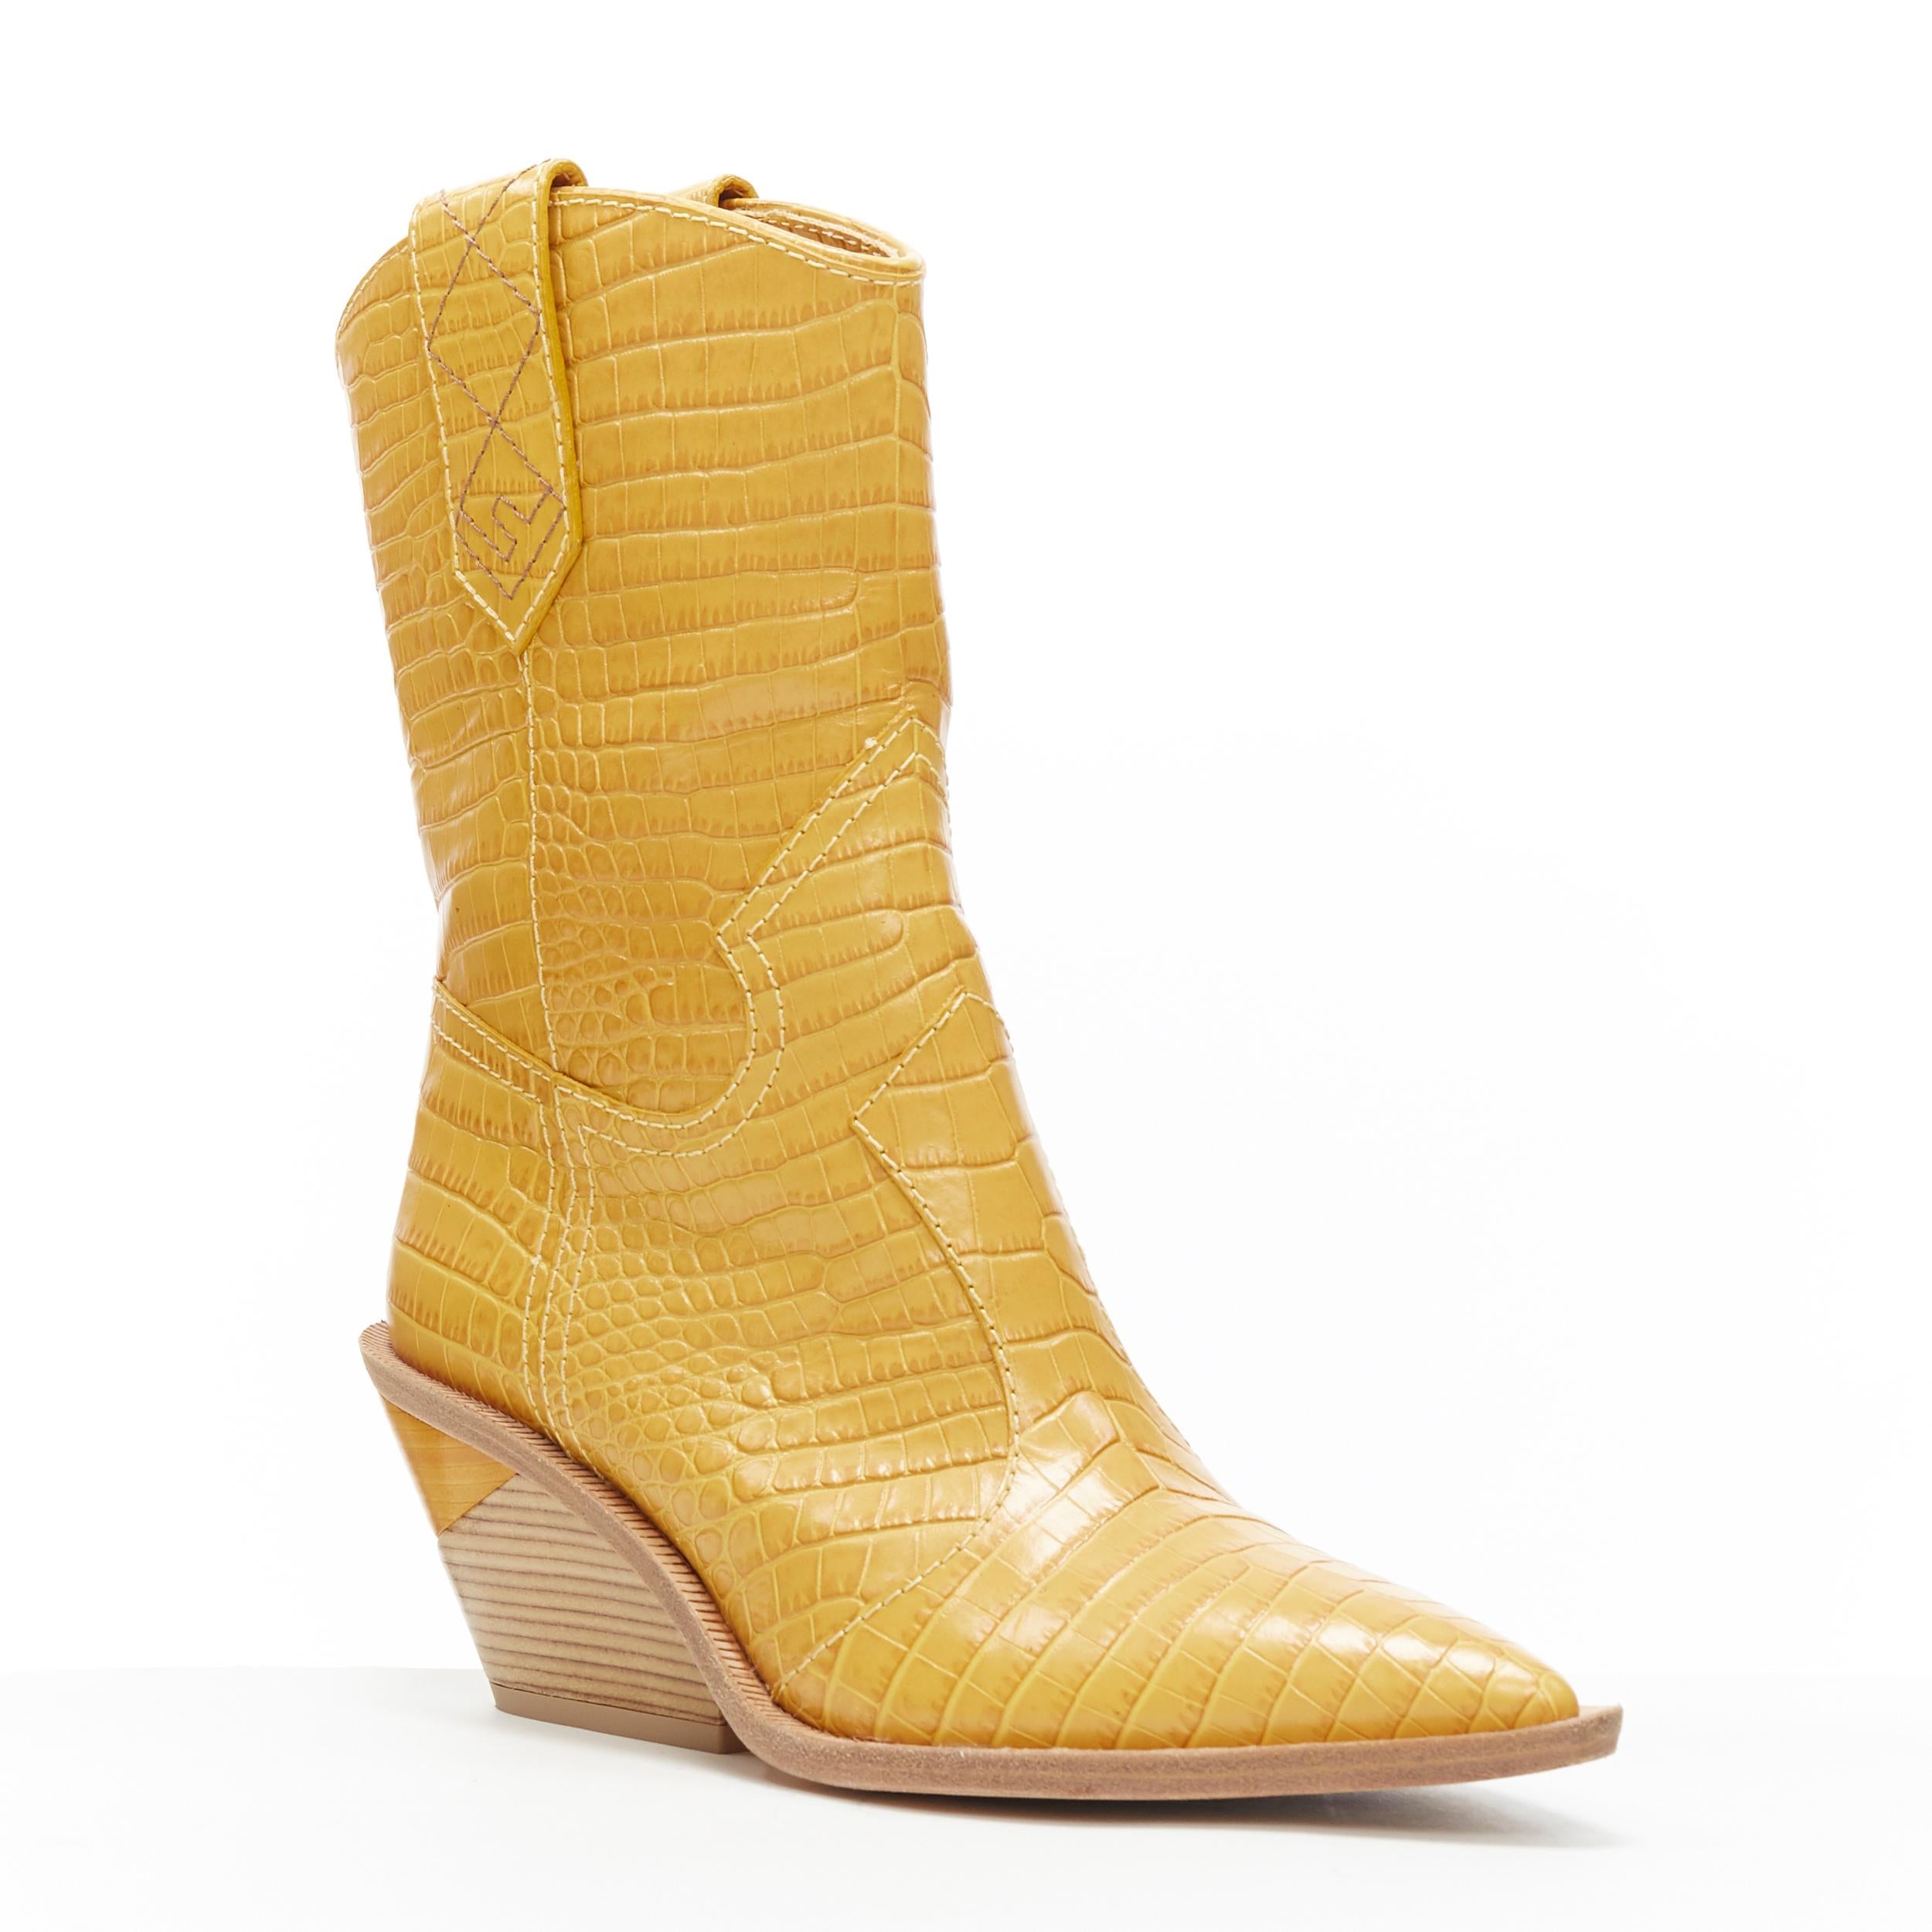 runway FENDI Cutwalk yellow stamped croc calf leather western cowboy boots EU37
Brand: Fendi
Model Name / Style: Cutwalk
Material: Leather
Color: Yellow
Pattern: Animal print
Closure: Pull on
Extra Detail: Mid (2-2.9 in) heel height. Pointed toe.